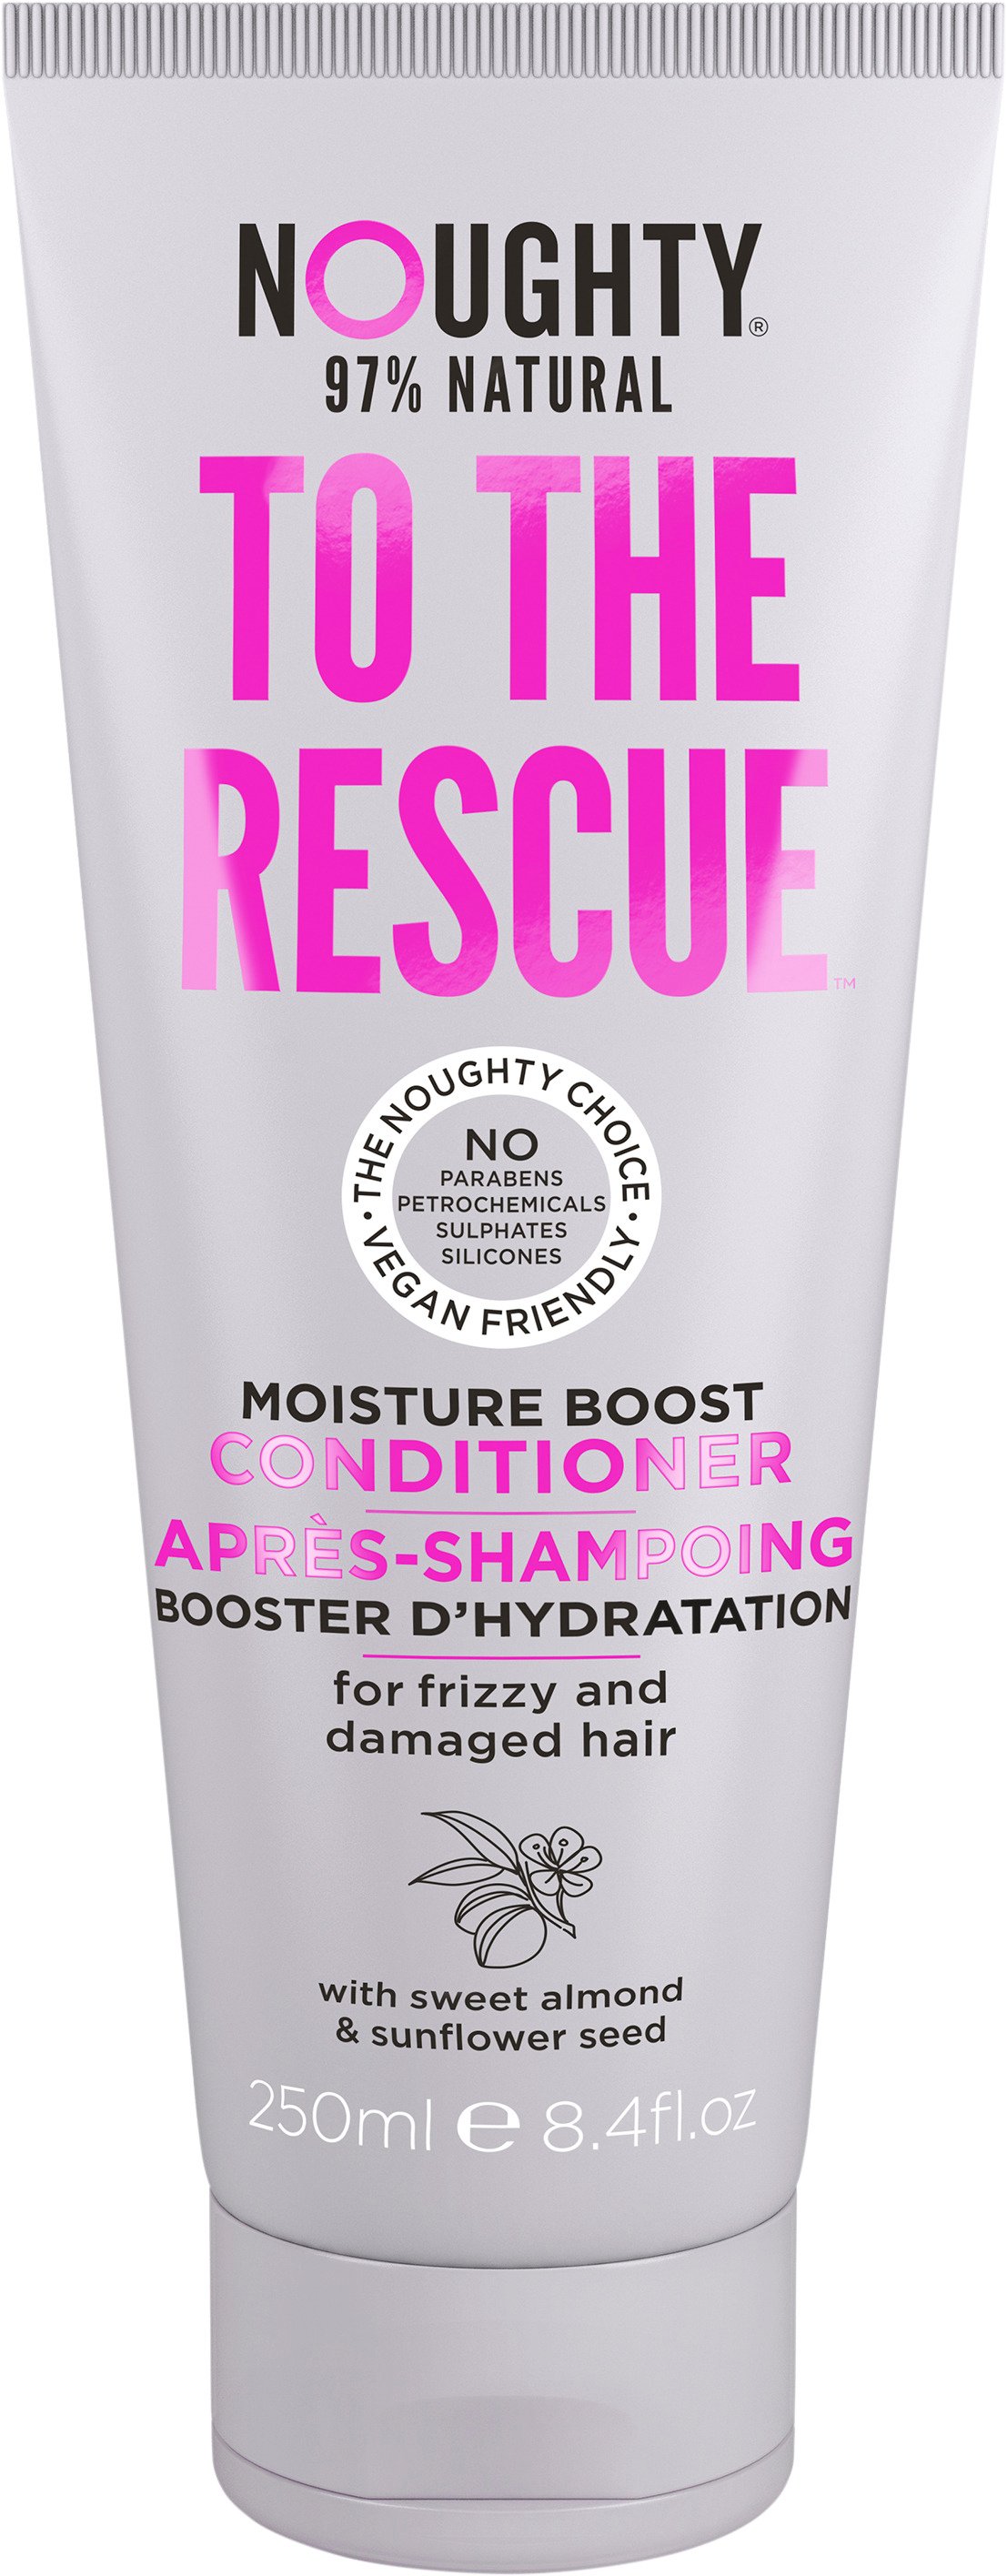 Noughty To The Rescue Conditioner 250ml